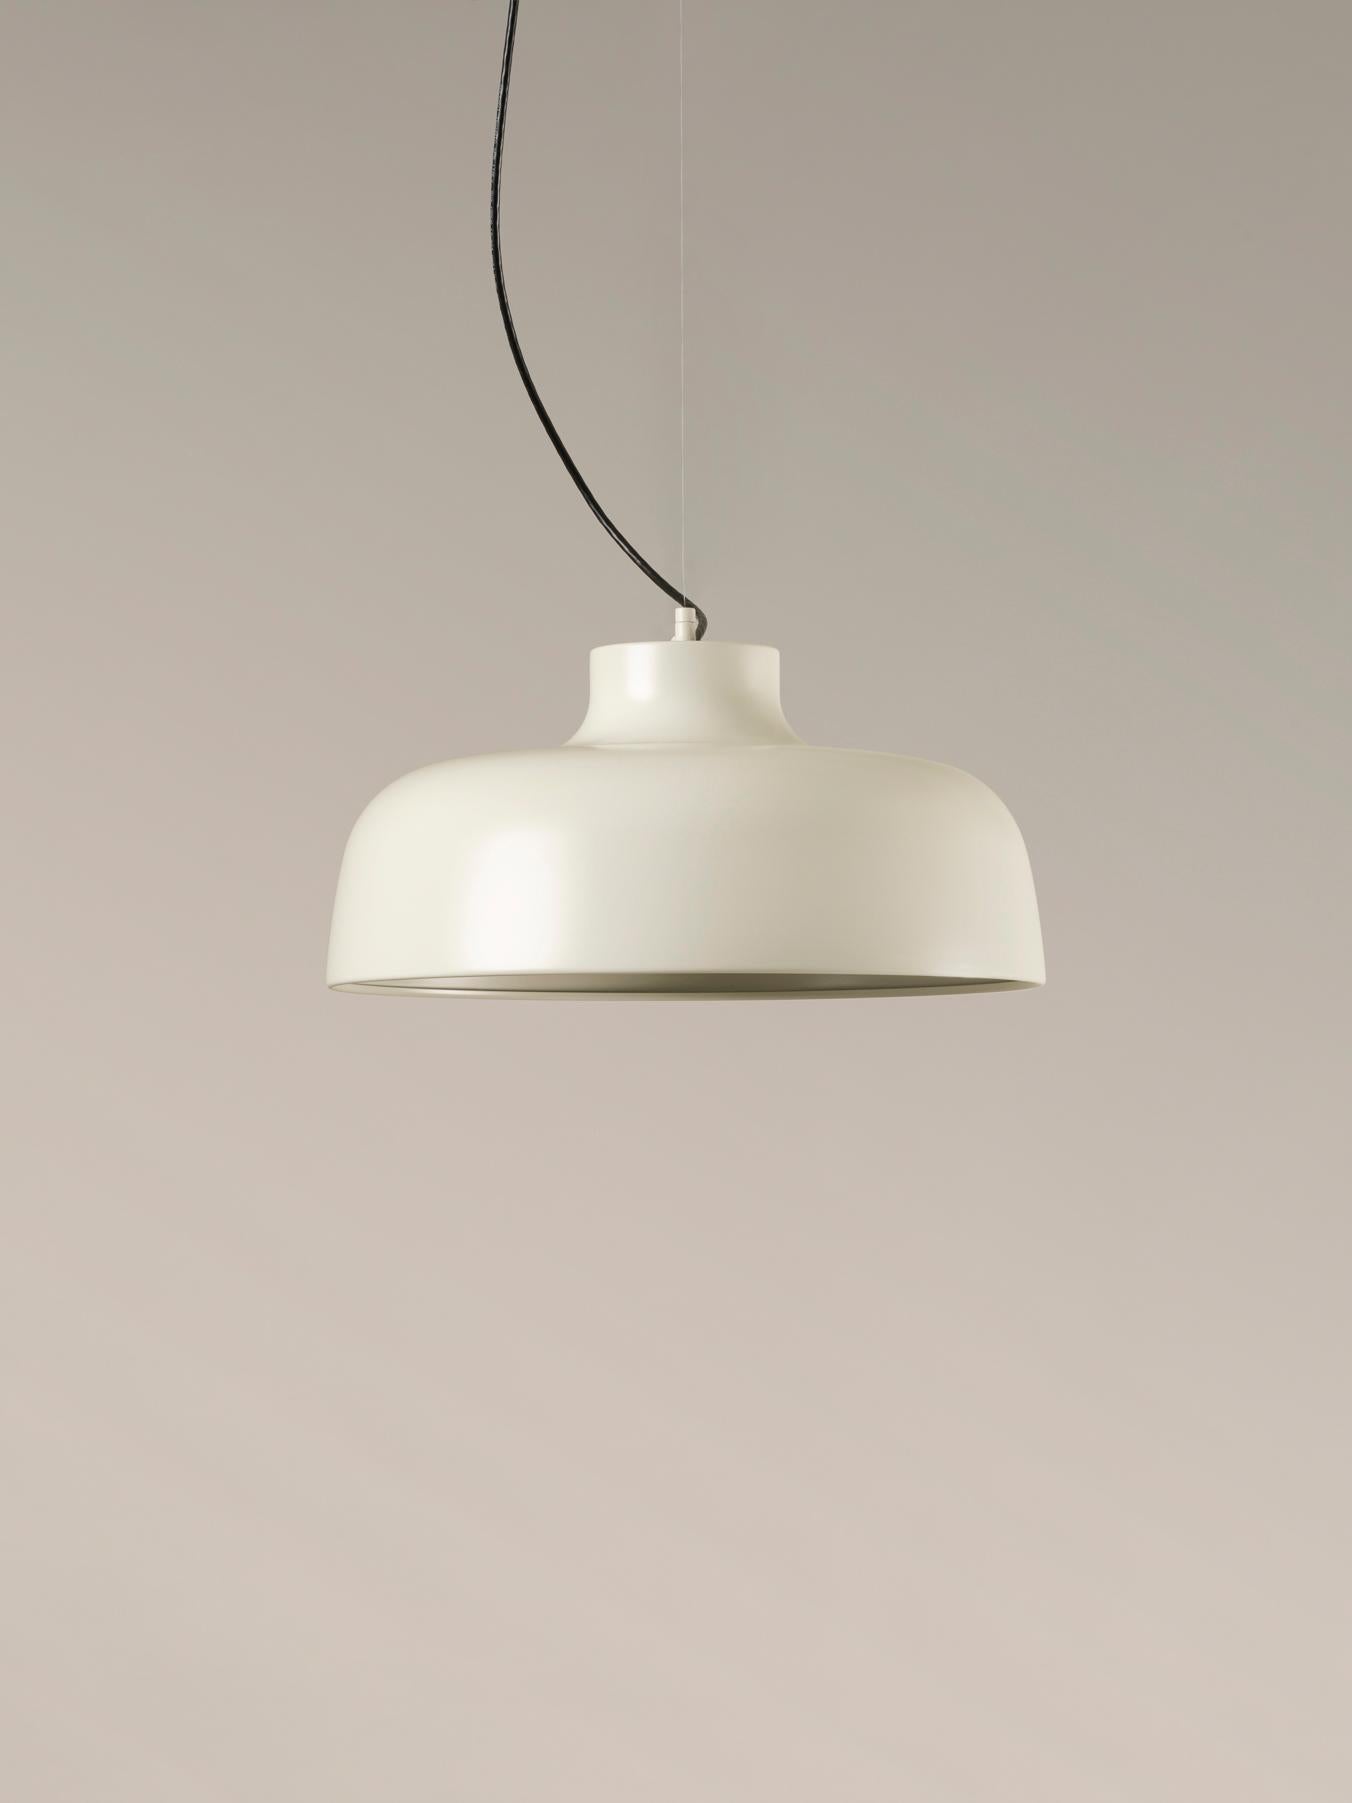 White M68 pendant lamp by Miguel Milá
Dimensions: D 46 x H 22 cm
Materials: Aluminum.
Available in other colors.

The redolent shades of M68, in vibrant red, white or matt black, as well as polished aluminium, were inspired by the shape of a